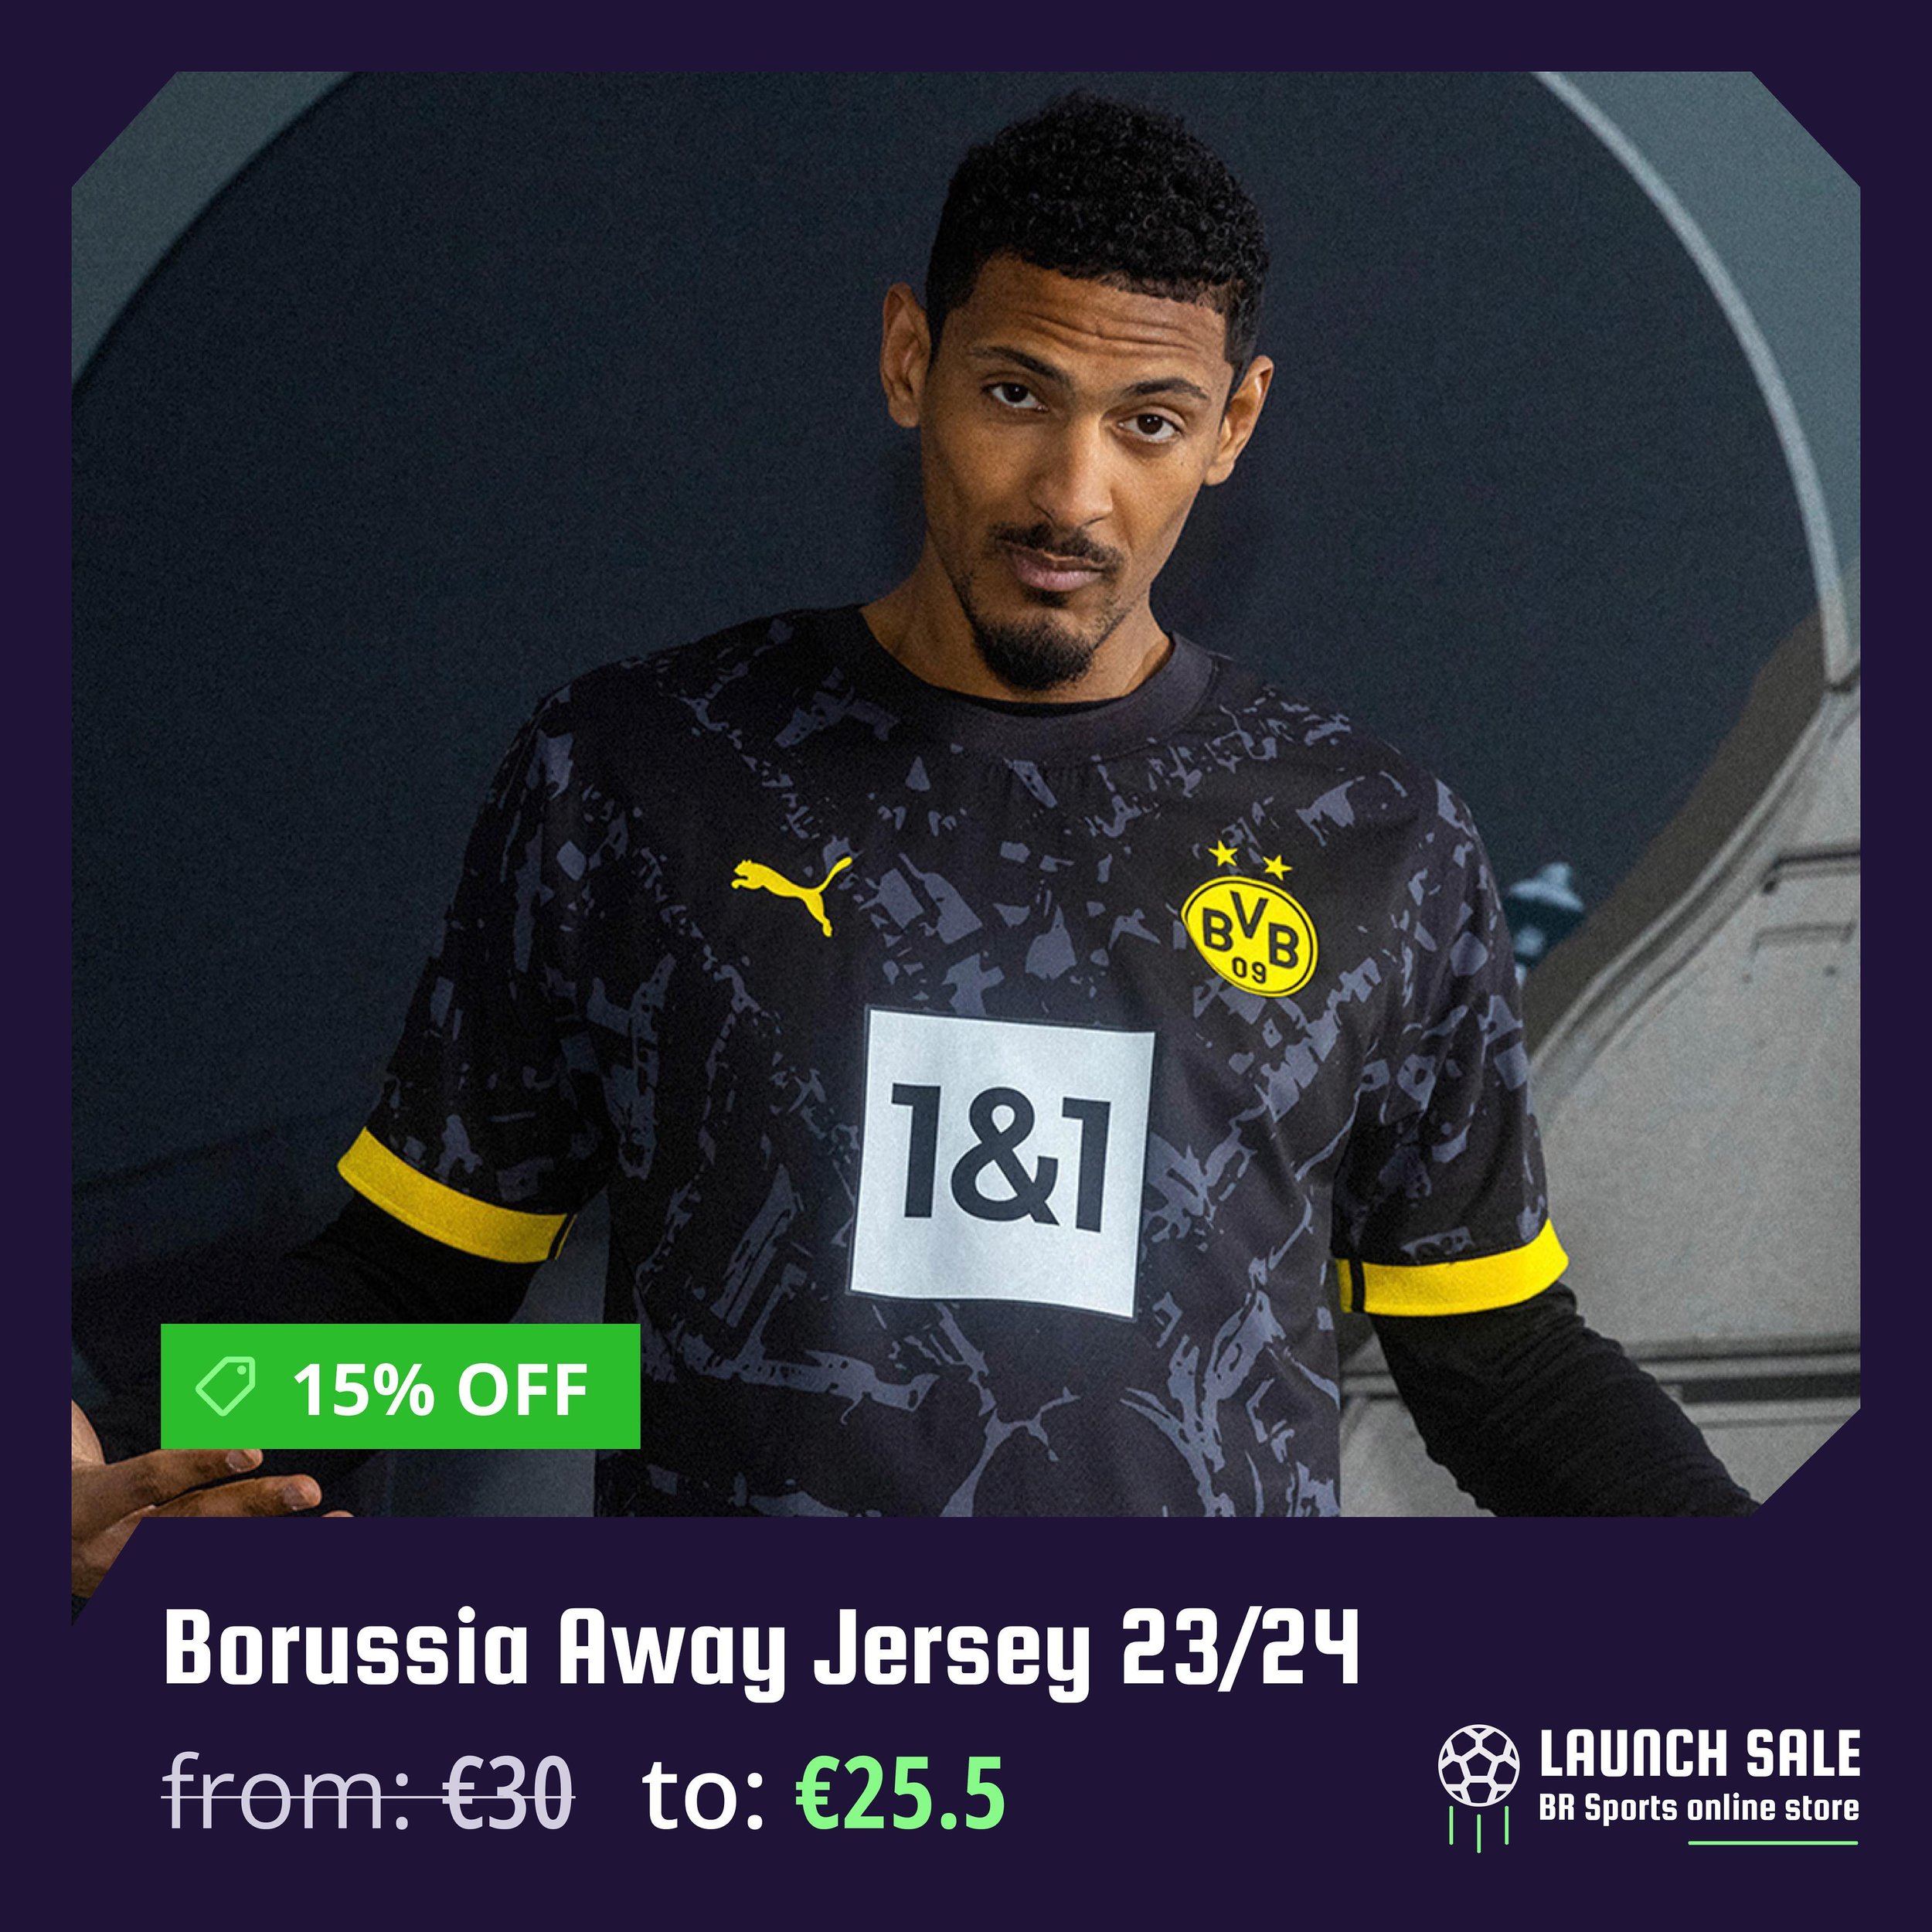 🚀 Launch Sale BR Sports online store

Enjoy 15% OFF on Dortmund Away 2023/24 jersey
from: &euro;30 - to: &euro;25.5

✍️ Customization: &euro;10
📦 Delivery: &euro;6.9

Click the link in the bio and wear your football love!

*The discount will be app